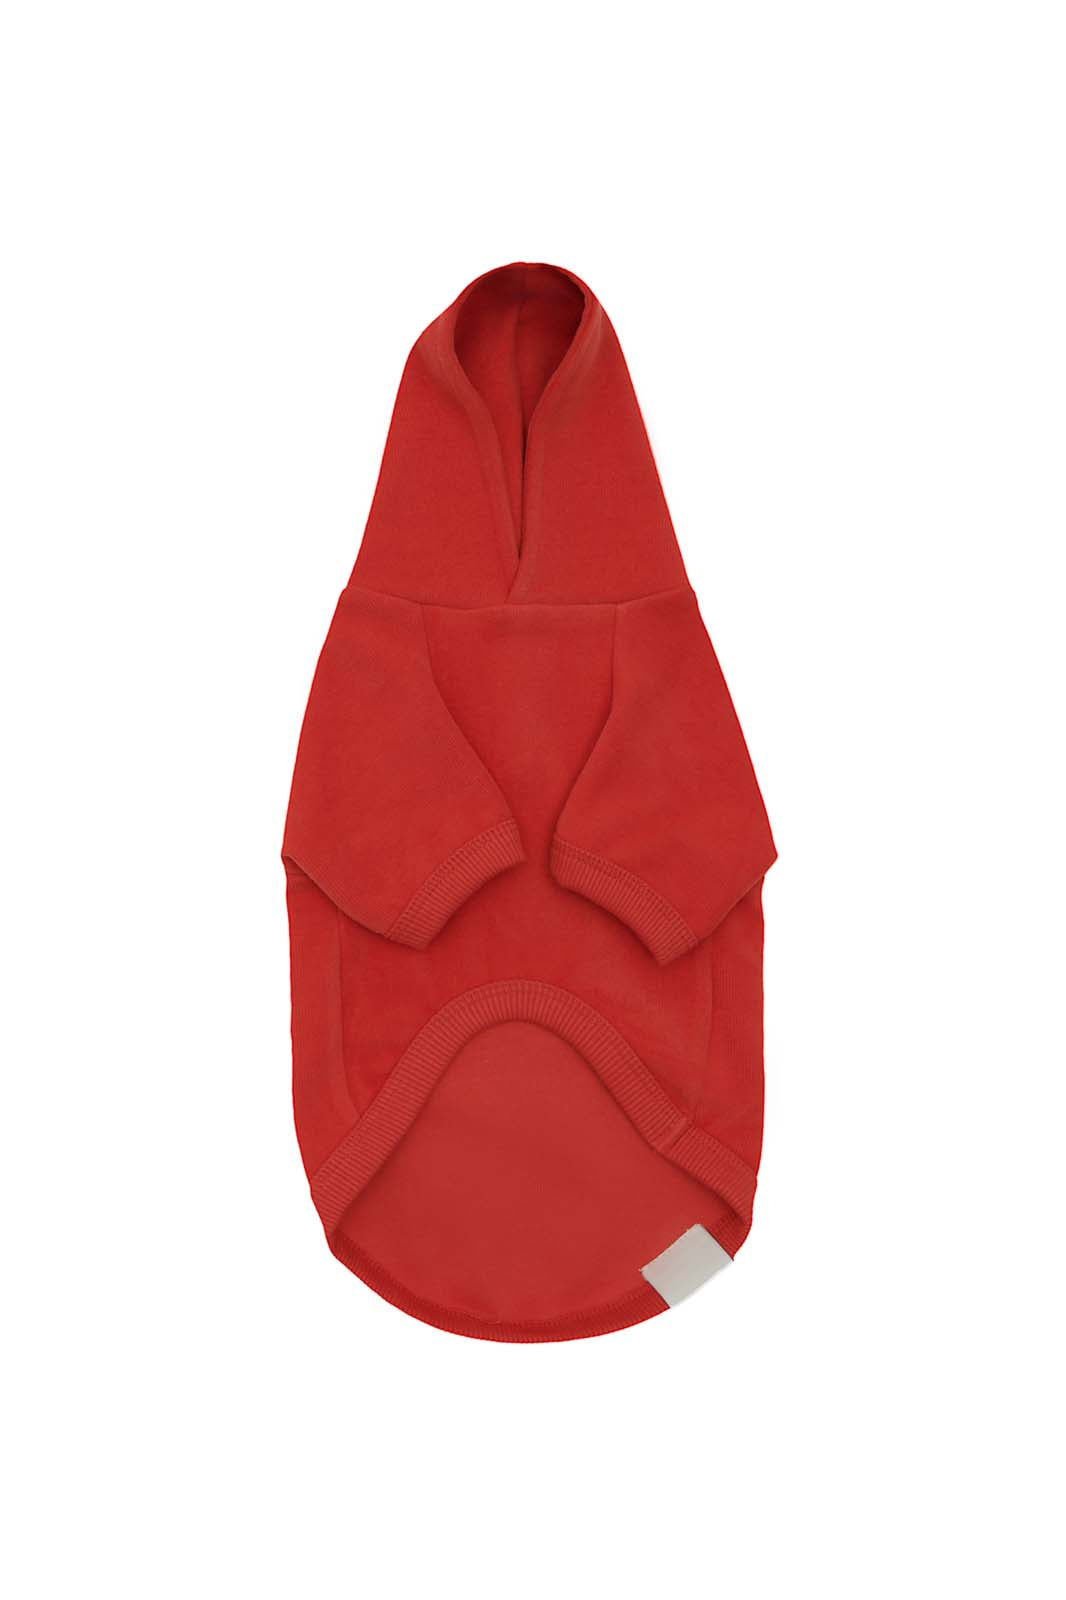 Matchy Hoodie - Light Red